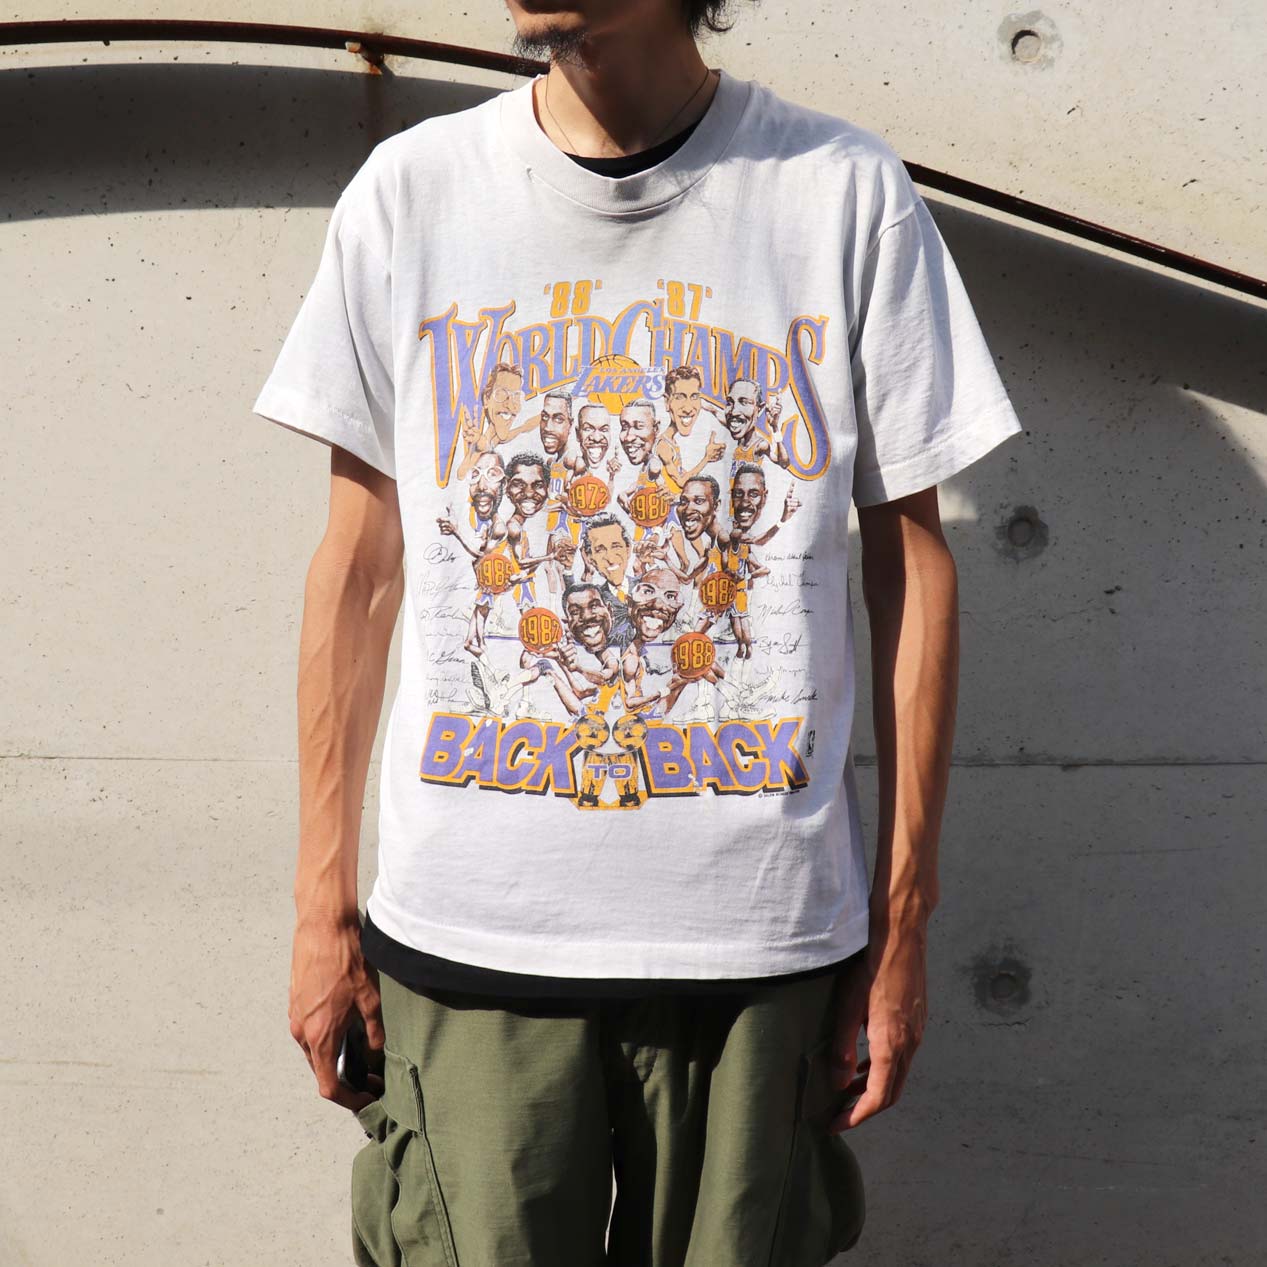 POST JUNK / 's LOS ANGELES LAKERS WORLD CHAMPS プリントTシャツ [L